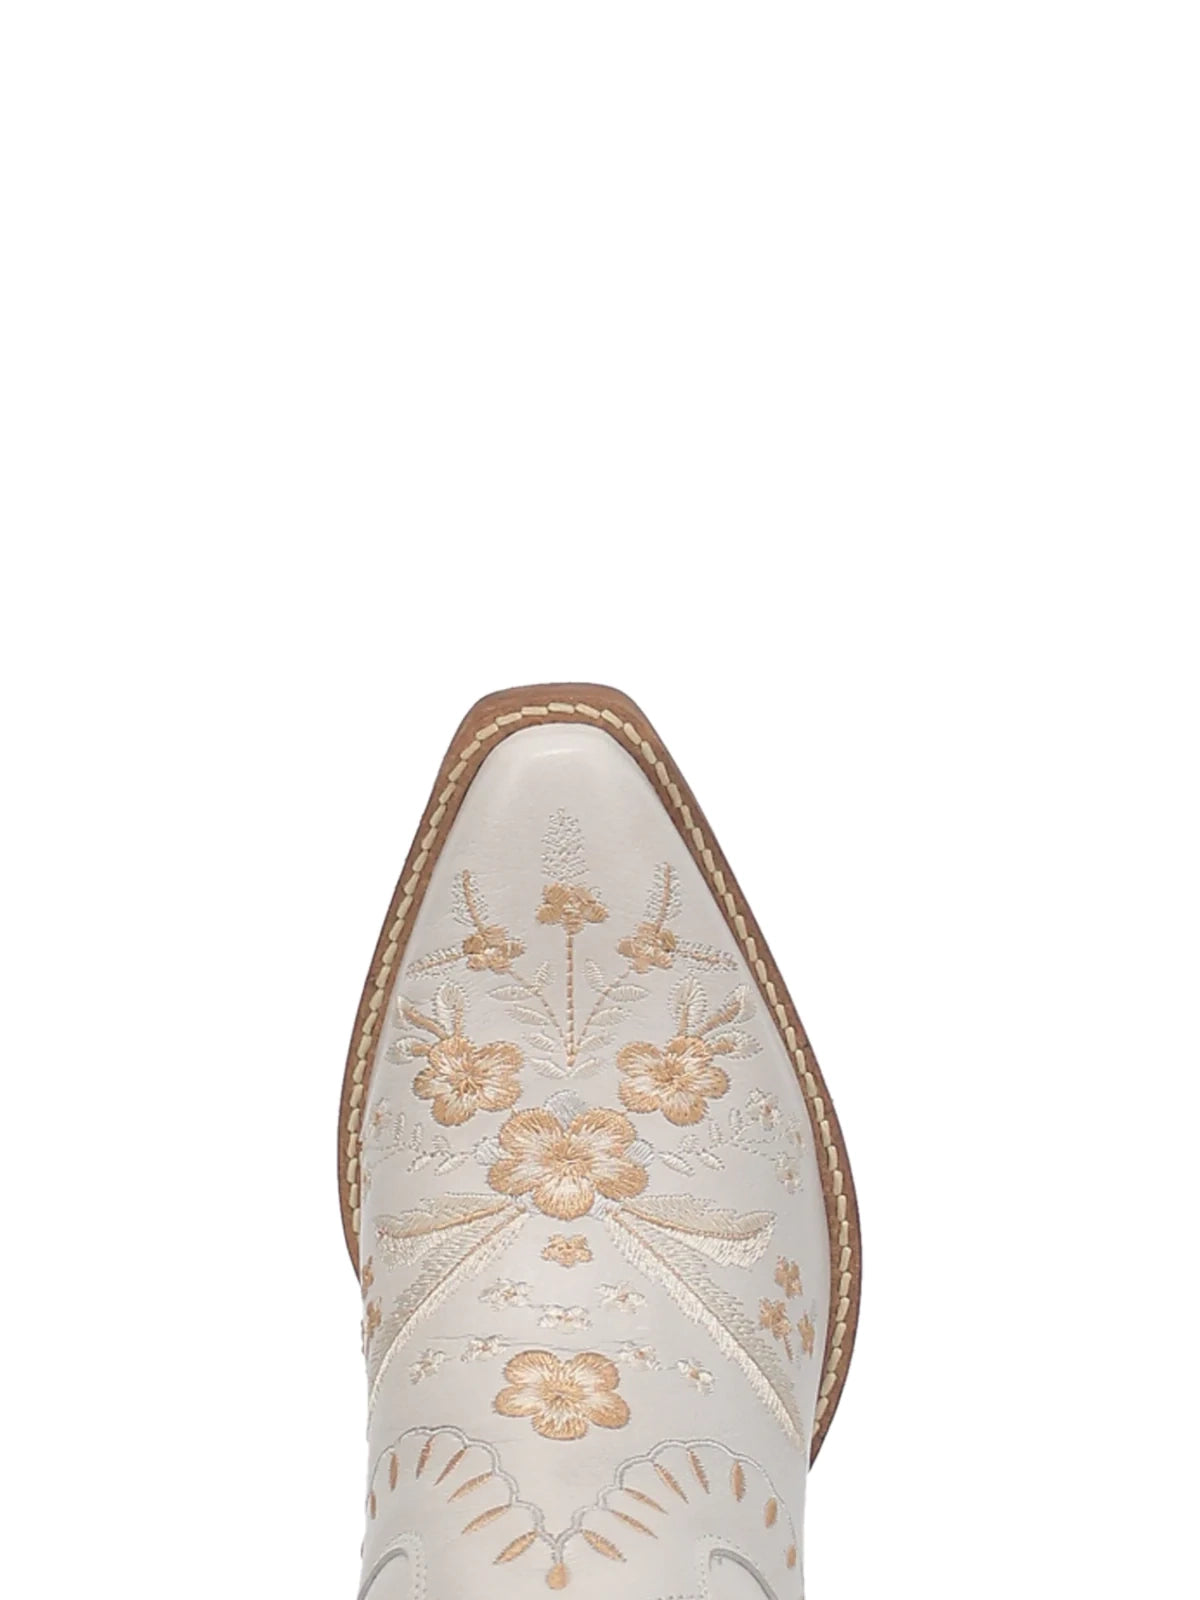 dingo 1969 primrose leather booties with embroidered flowers in white